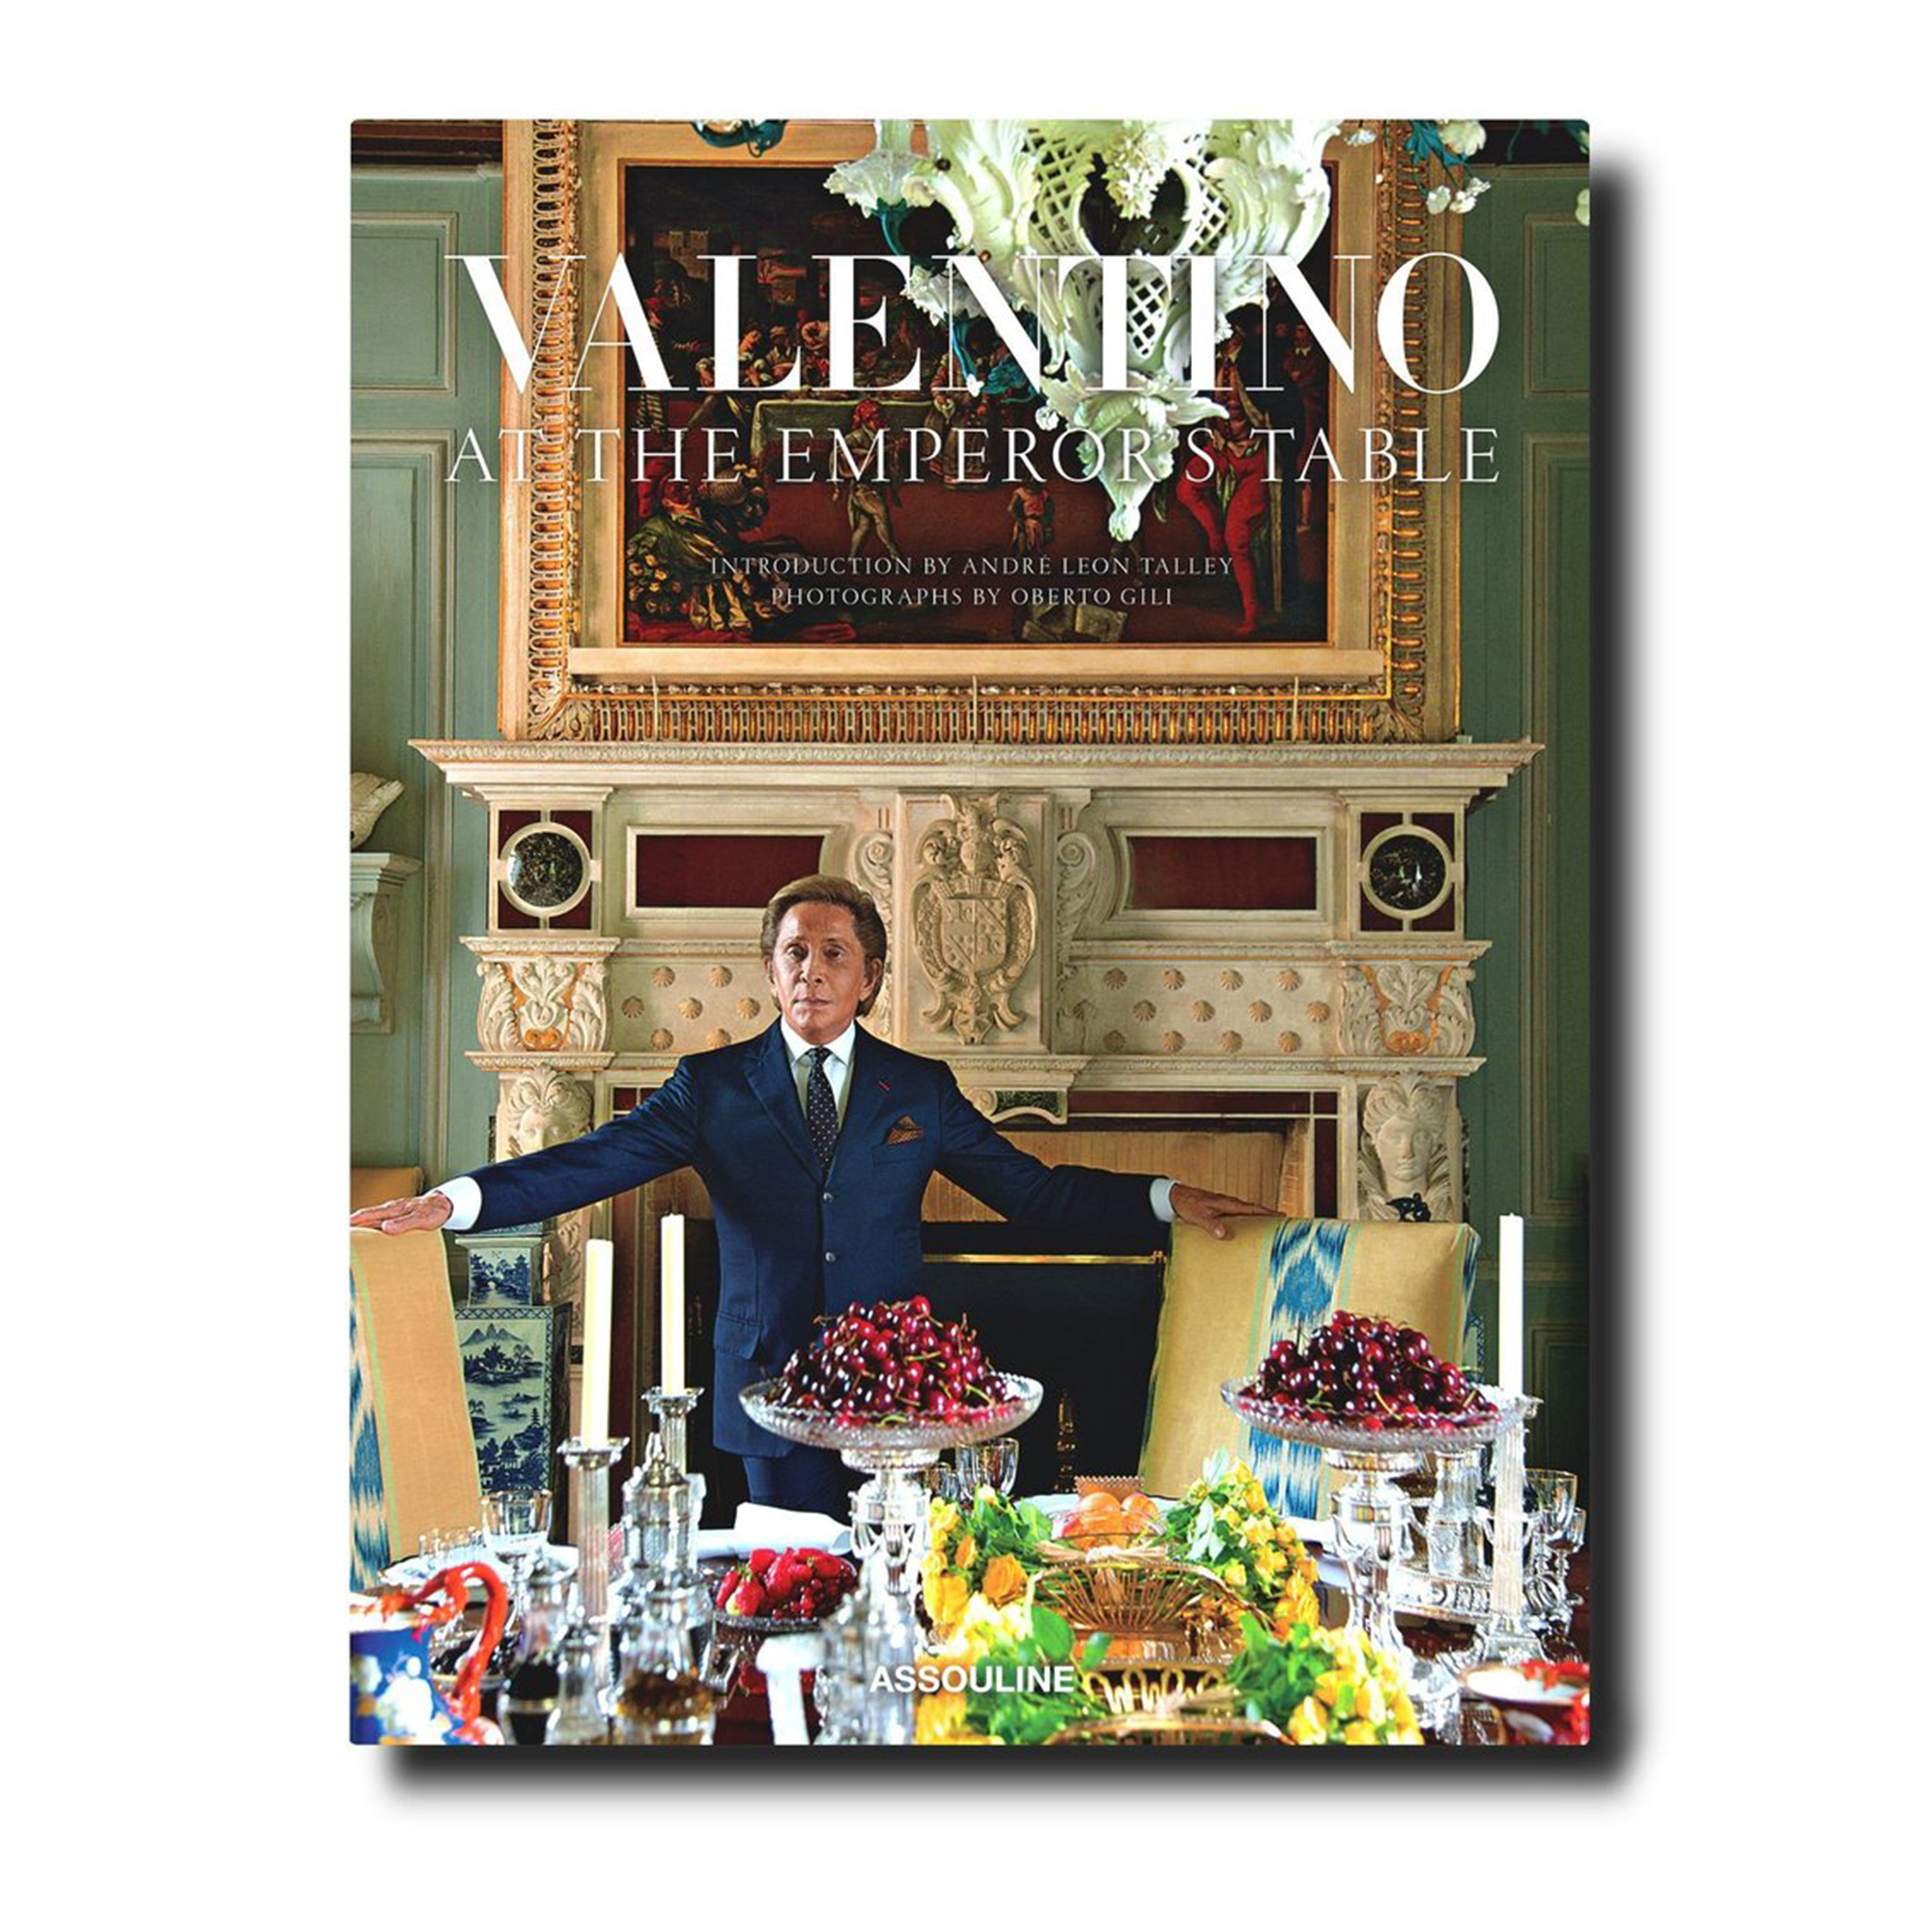 Valentino Garavani brings the same creativity to his dinners as he does to haute couture, creating luxurious and warm settings for his guests. This book, photographed by Oberto Gili, highlights Valentino’s exquisite table settings and recipes from his various homes, including his favorite Chateau de Wideville. Known for his signature “Valentino Red,” Valentino remains dedicated to excellence in both fashion and entertaining.